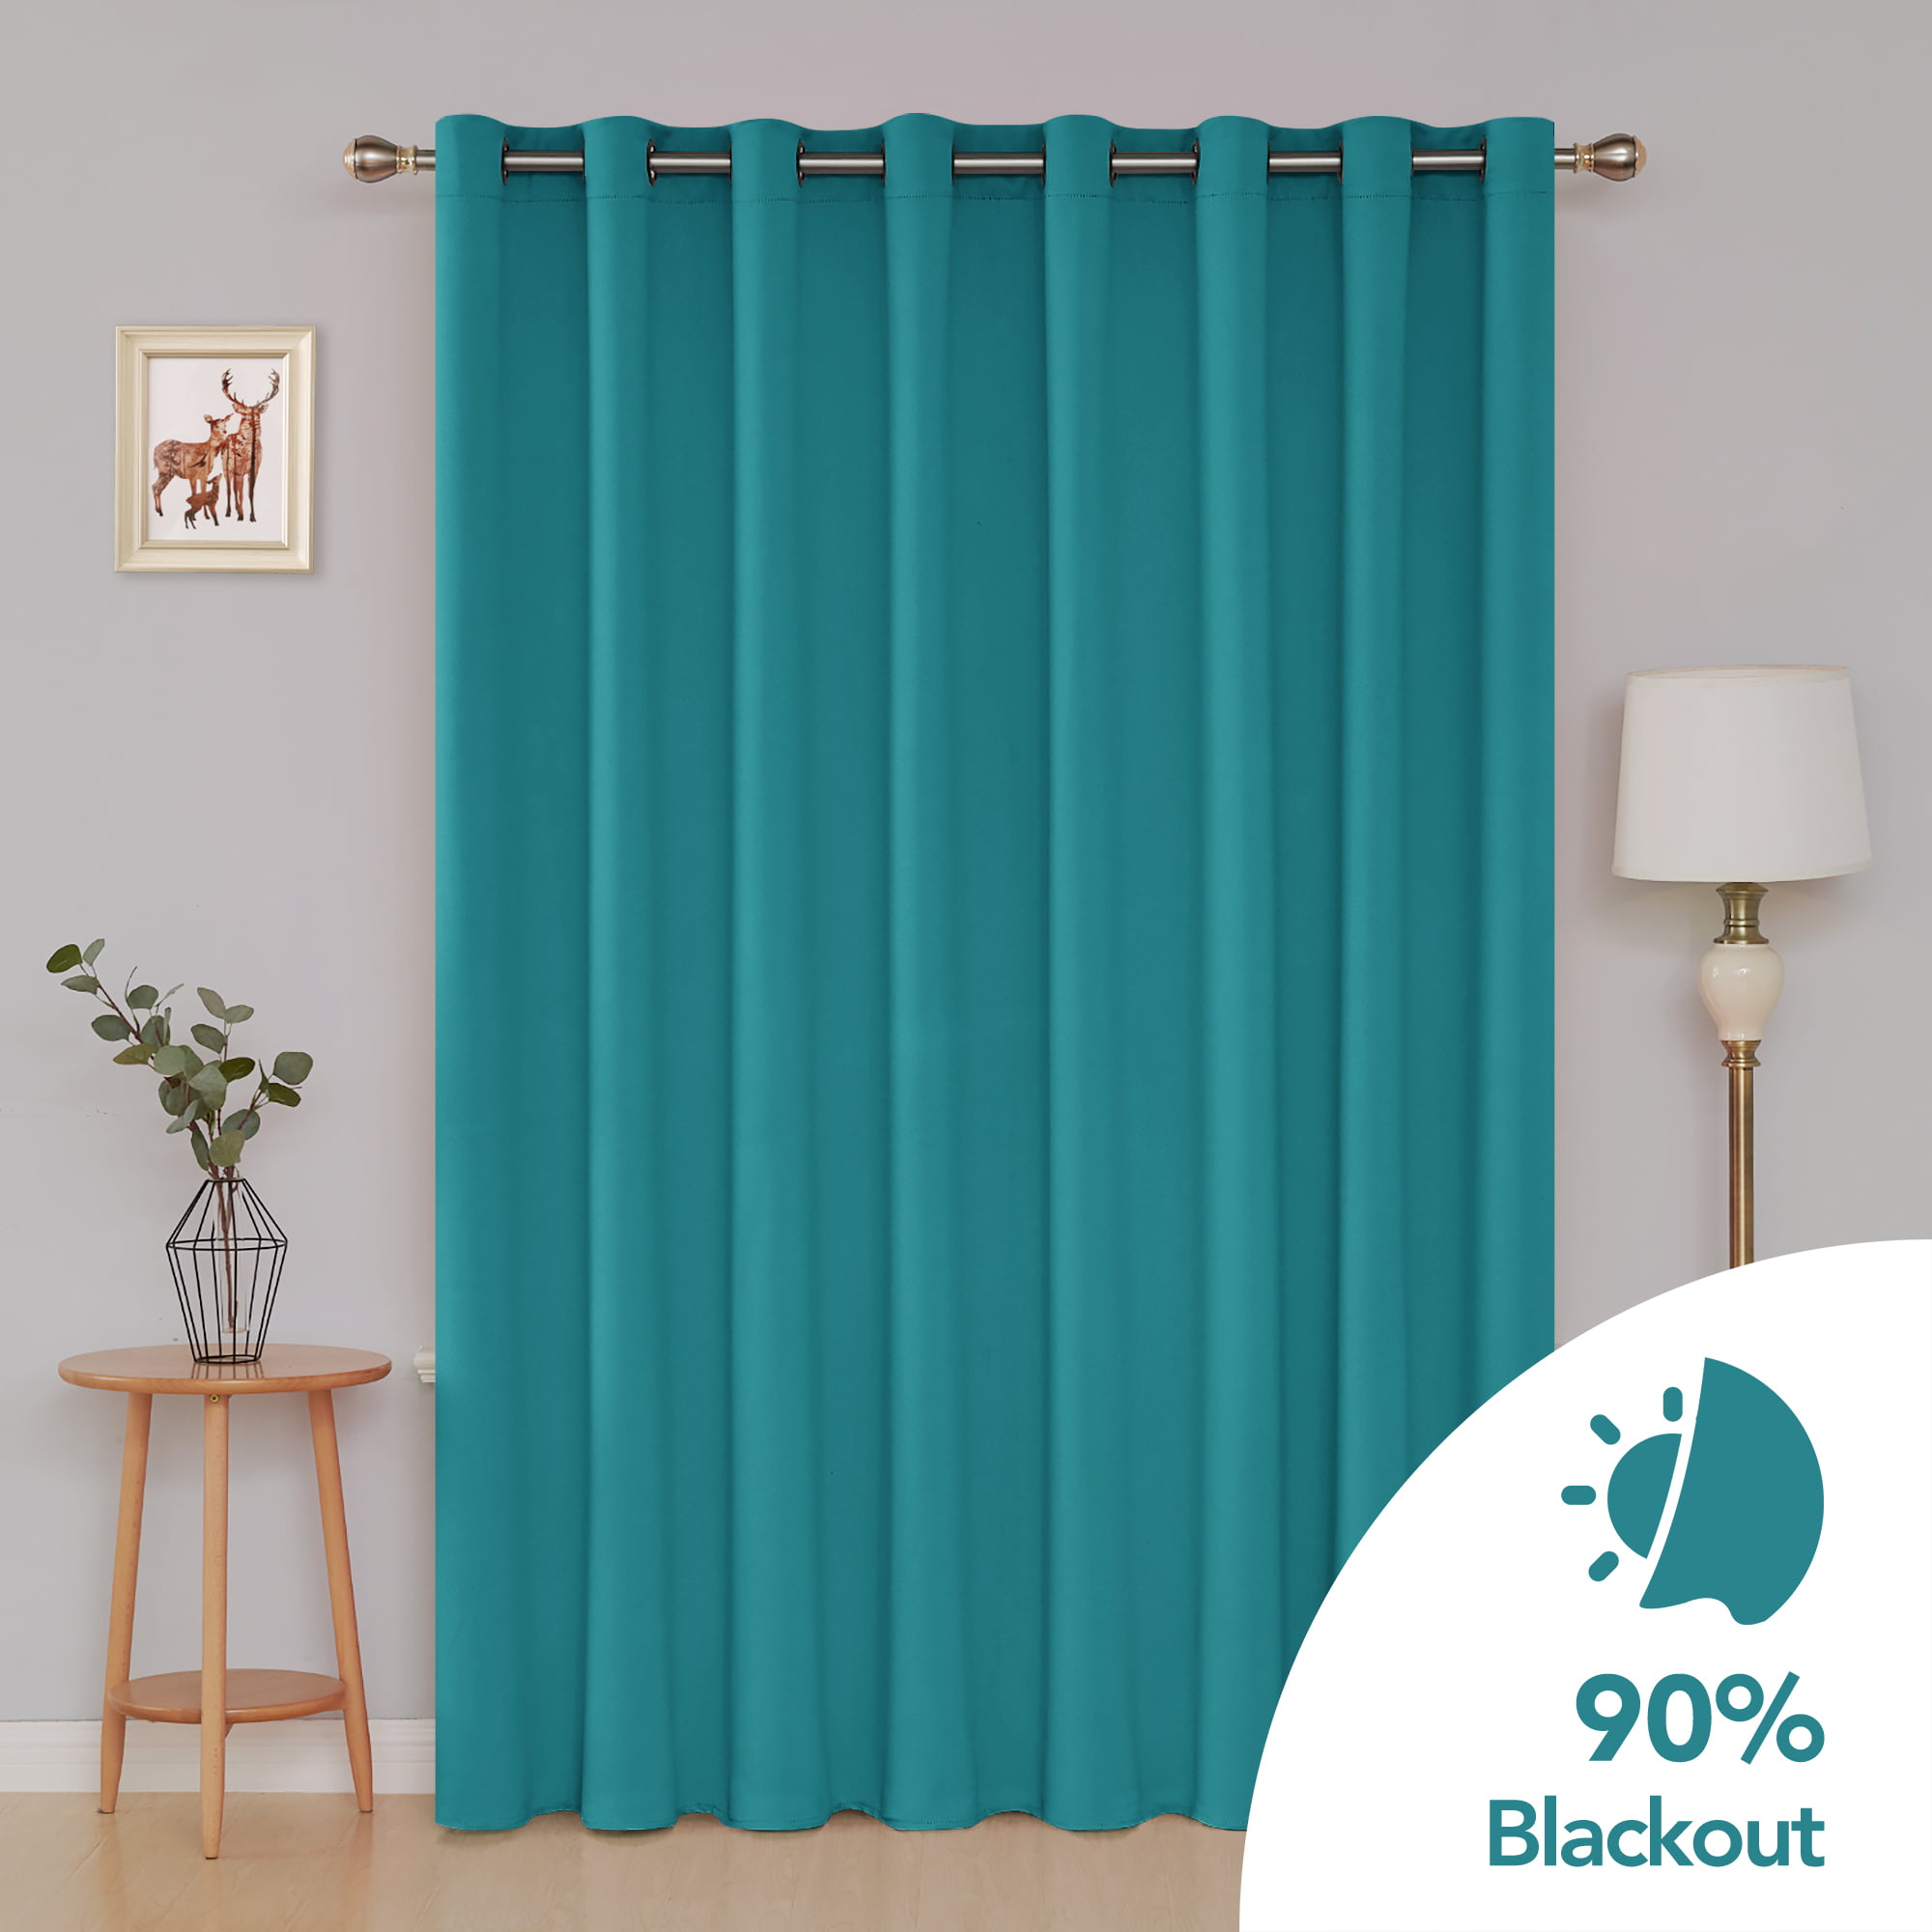 Deconovo Privacy Room Divider Curtain Thermal Insulated Blackout Curtains Screen 